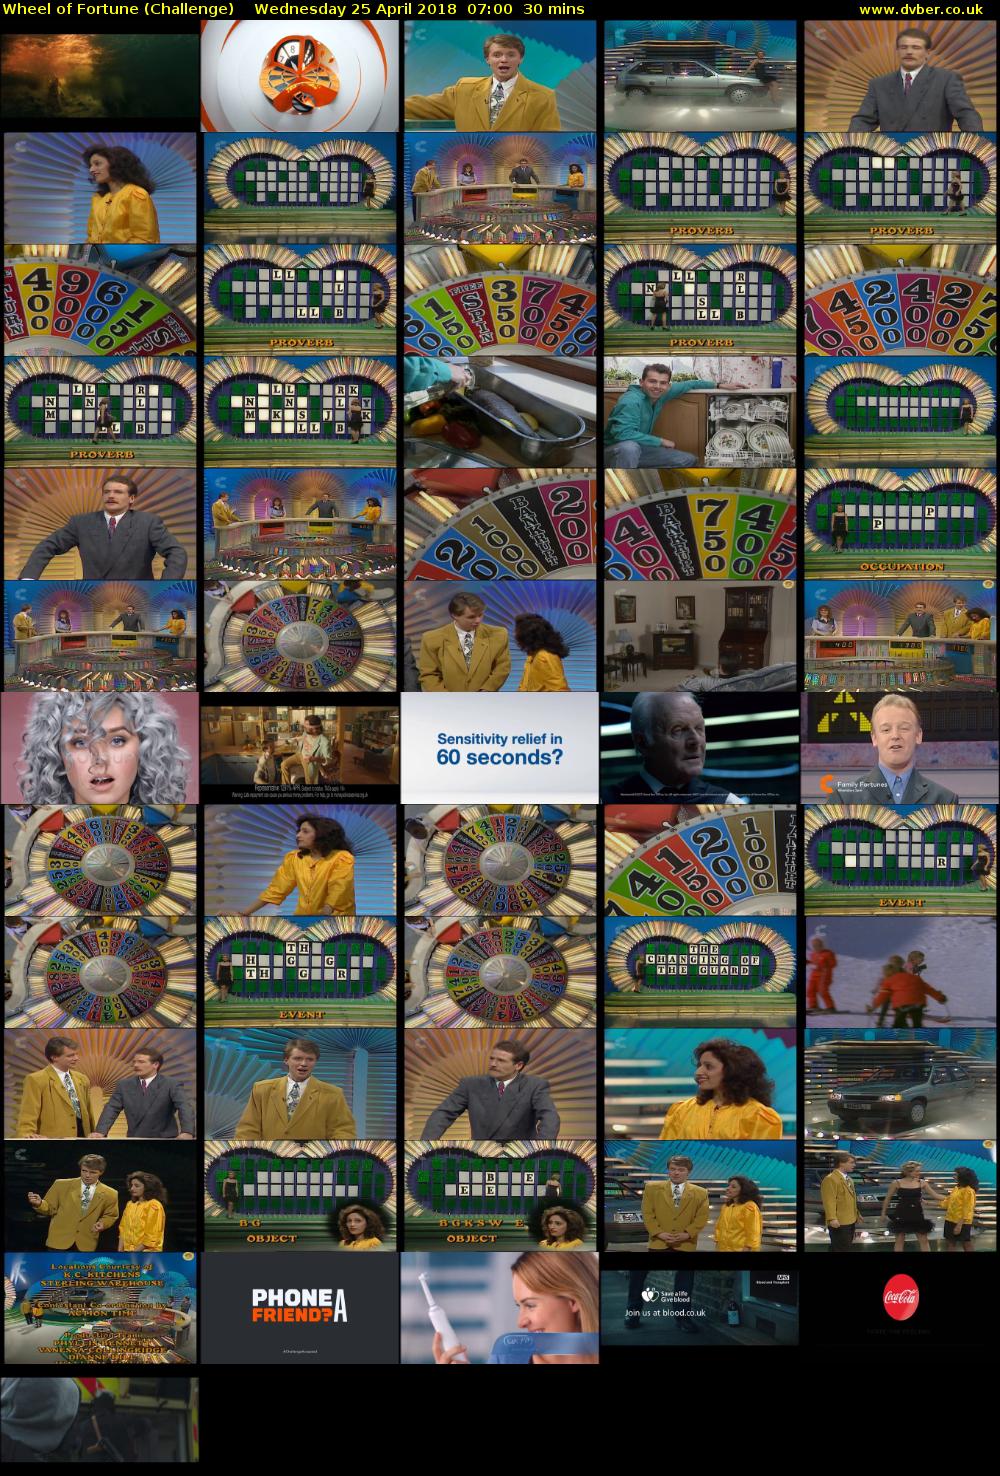 Wheel of Fortune (Challenge) Wednesday 25 April 2018 07:00 - 07:30